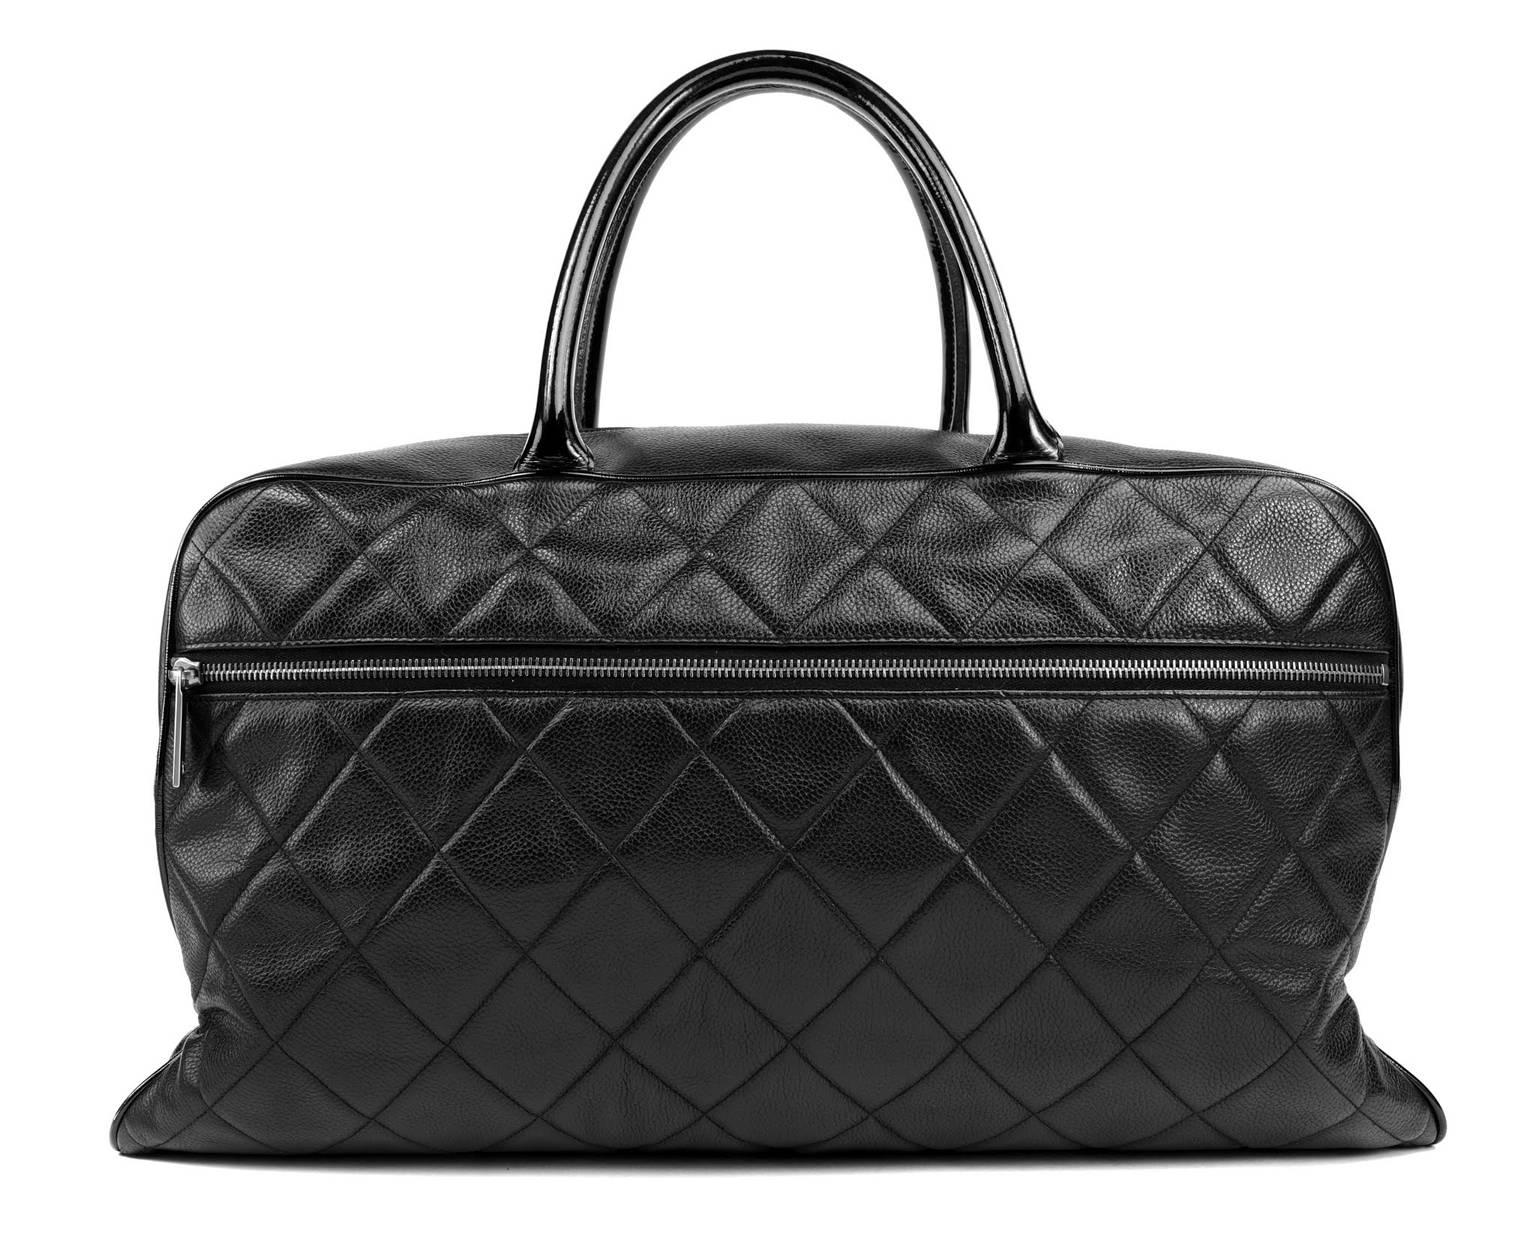 Chanel Black  Leather XXL Weekender - PRISTINE
  Perfect for air travel or a quick overnight getaway, this roomy Chanel is unisex, practical and chic.
 
Durable black textured leather is quilted in signature Chanel diamond stitched pattern. 